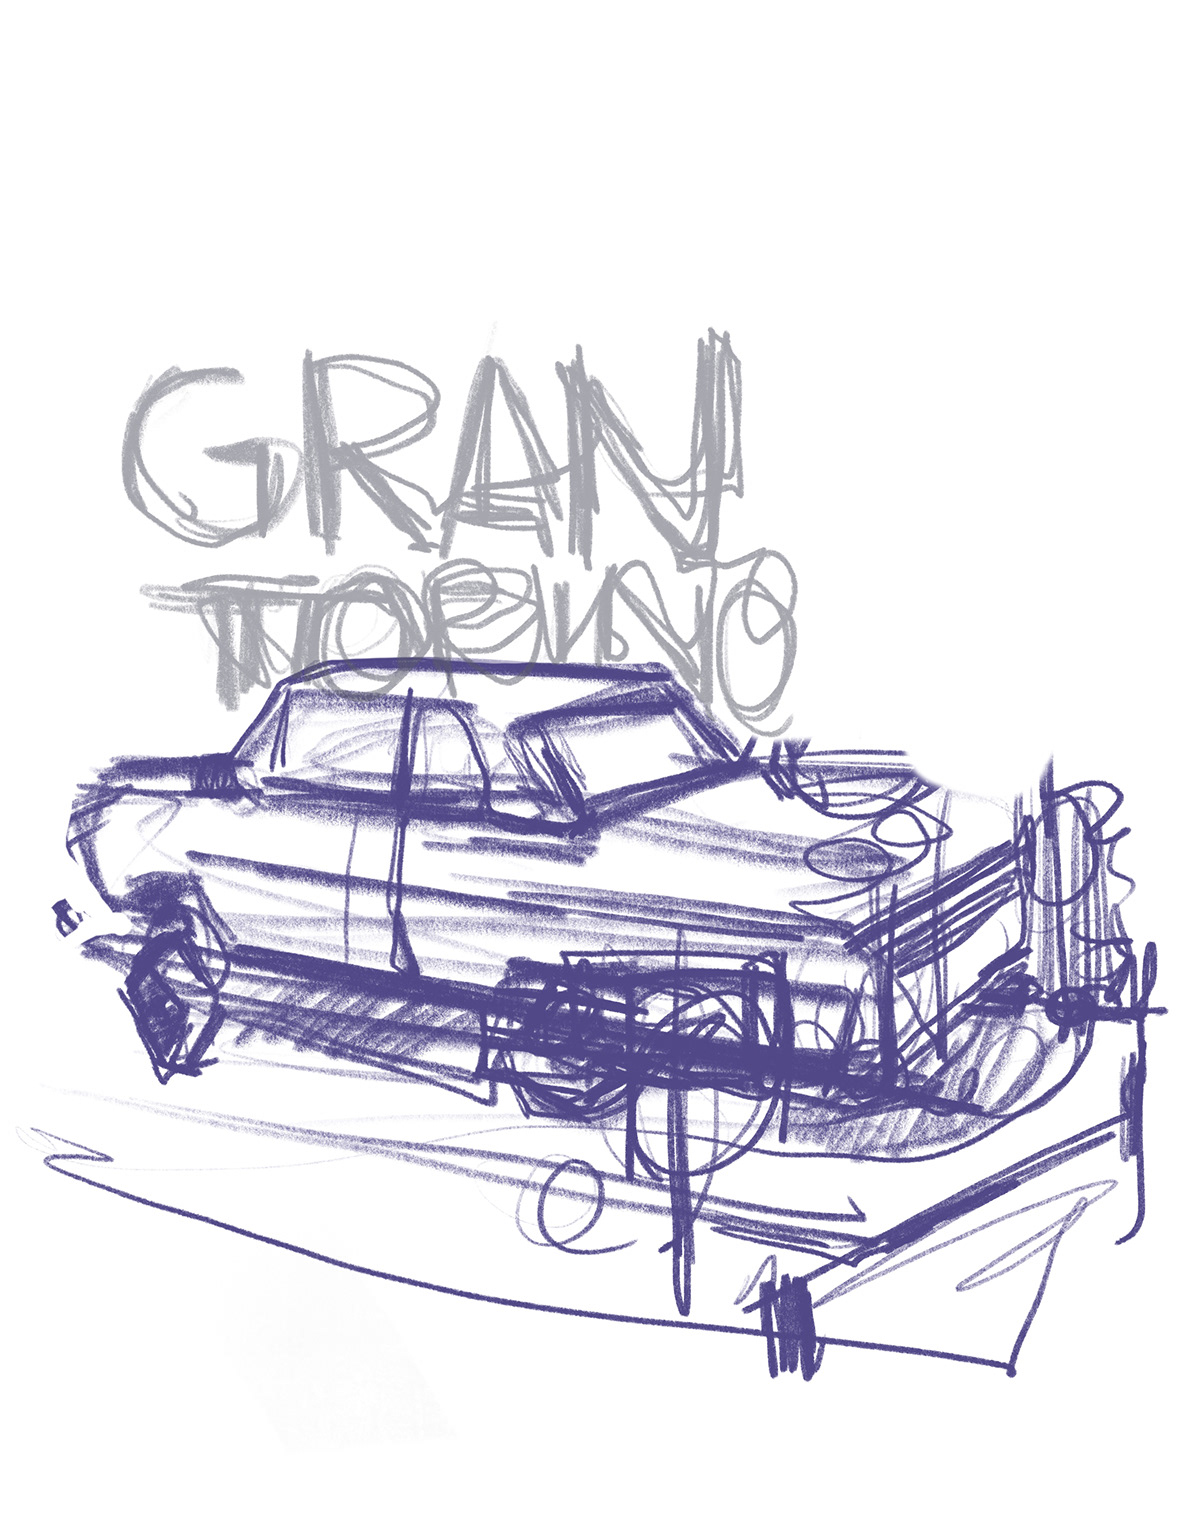 Gran Torino Old car movie poster Clint Eastwood Poster Design typography   HAND LETTERING classic car Procreate inktober type